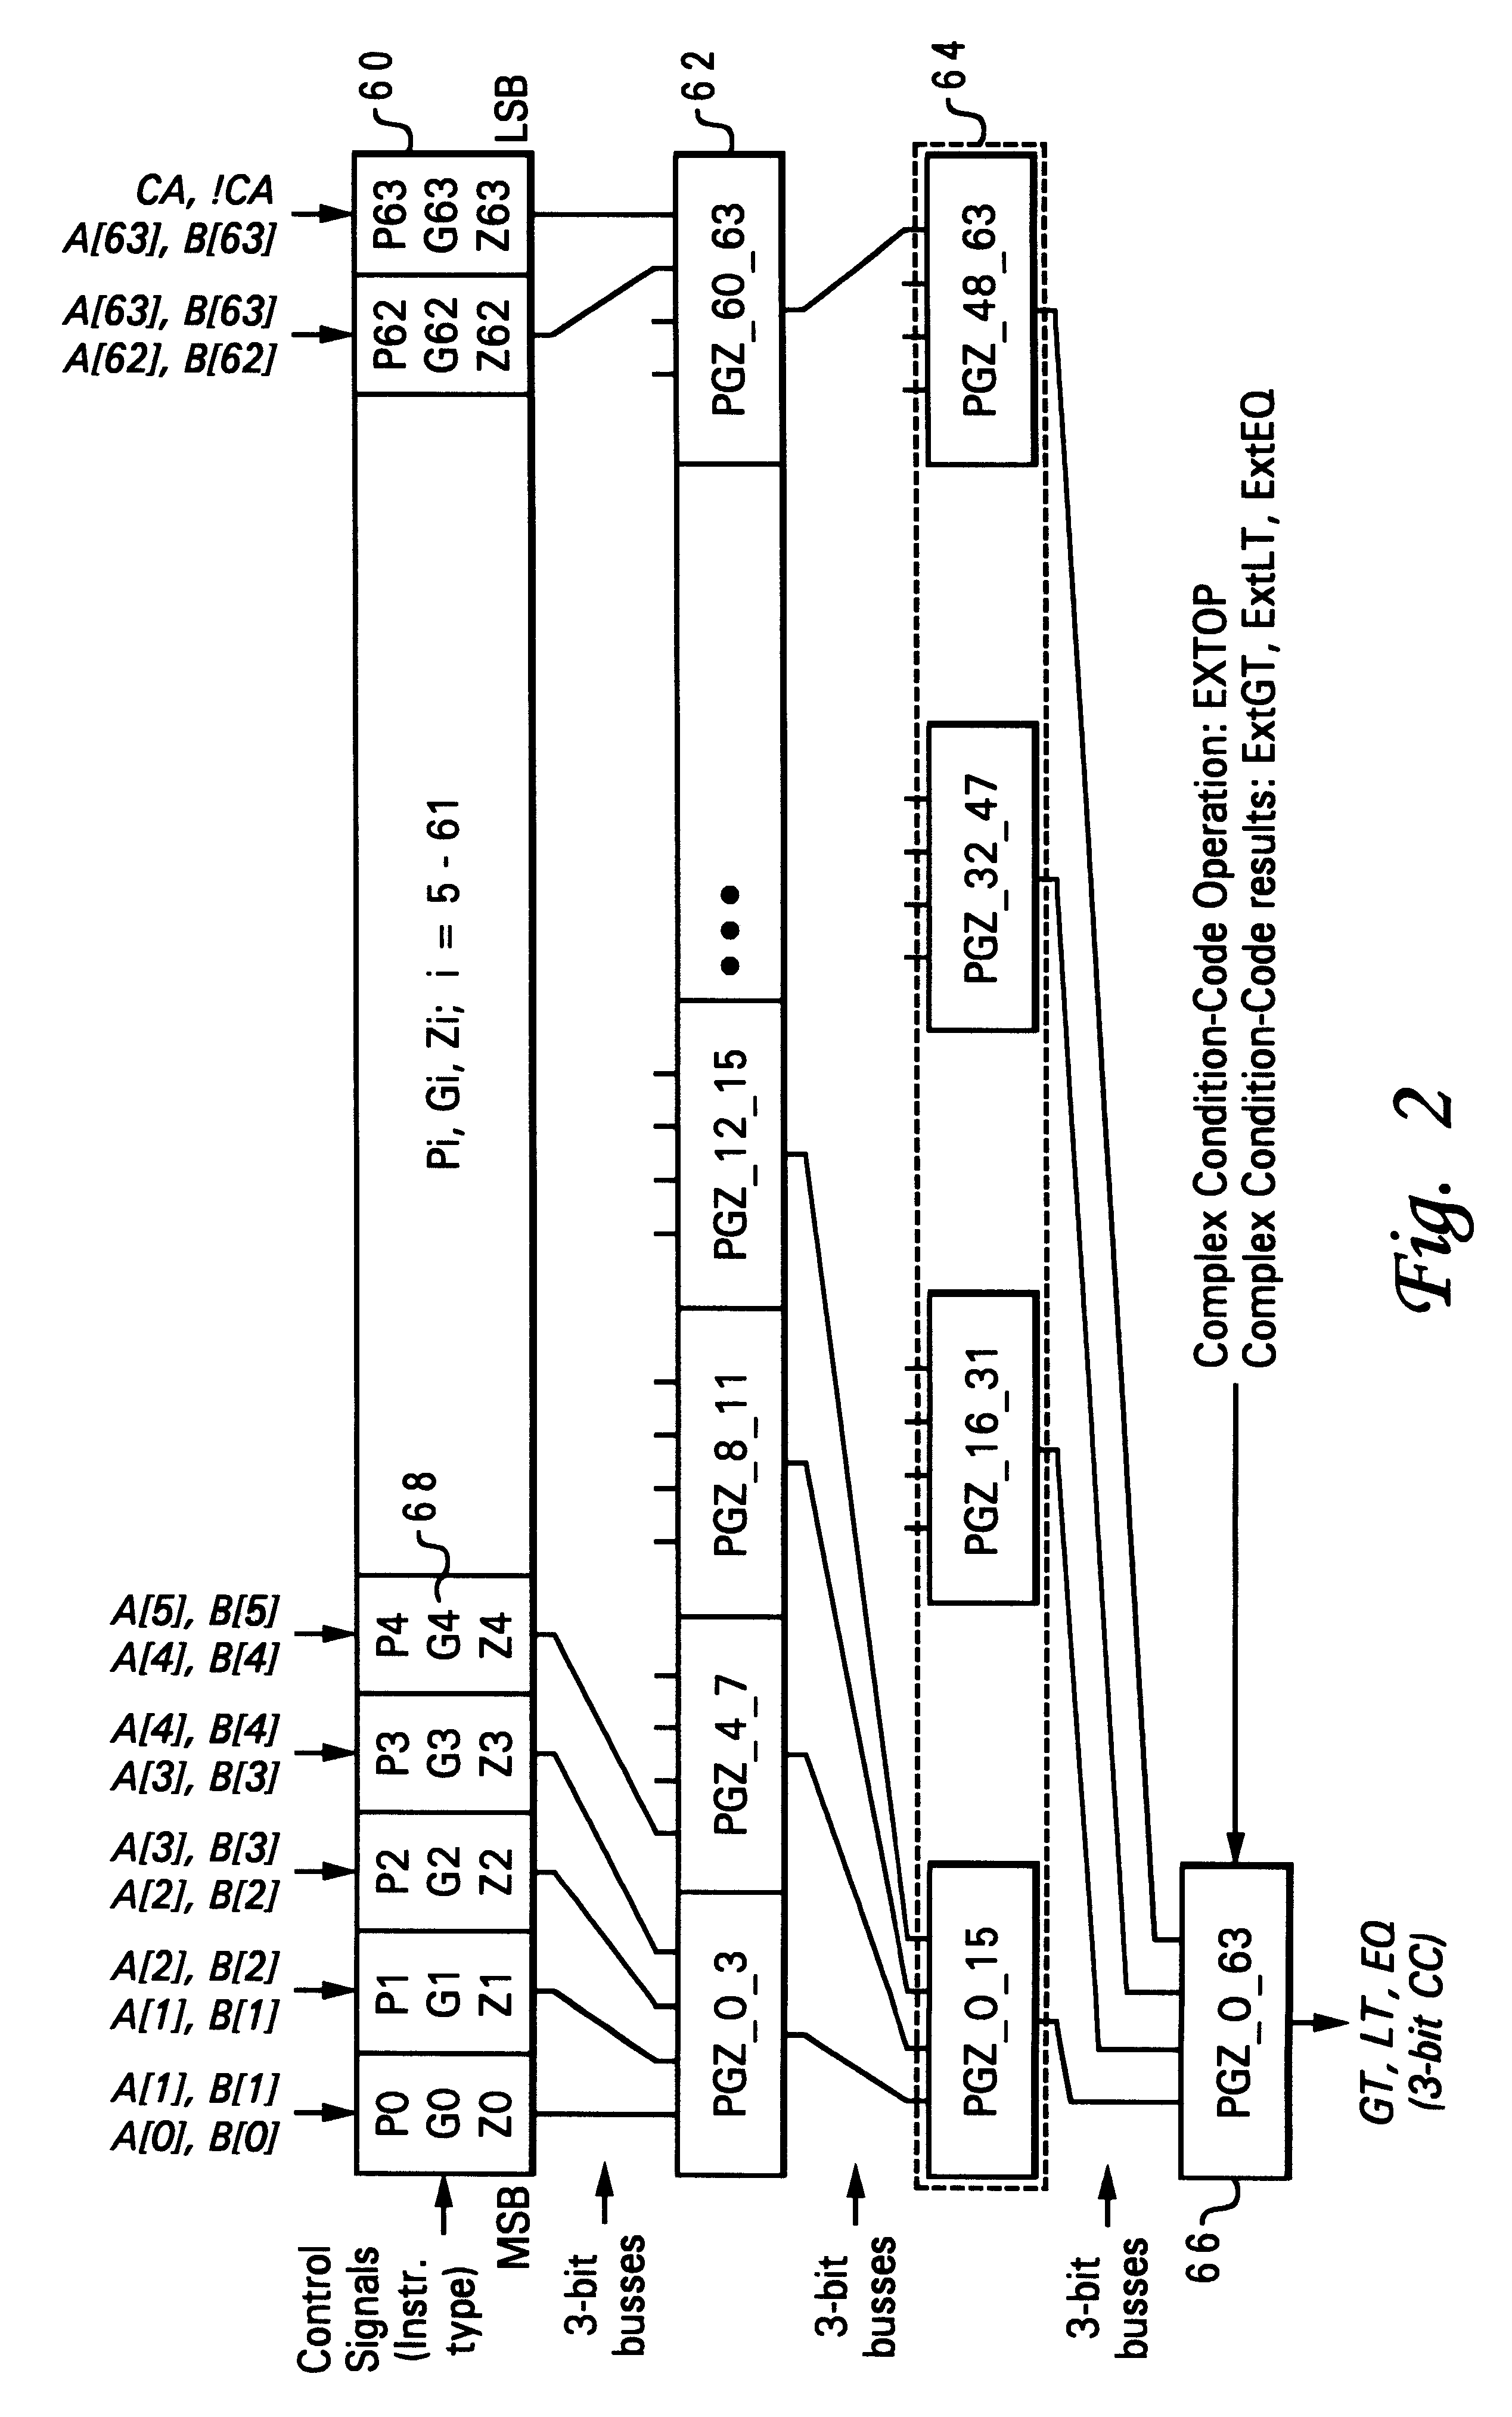 Processor and method for generating less than (LT), Greater than (GT), and equal to (EQ) condition code bits concurrent with a logical or complex operation